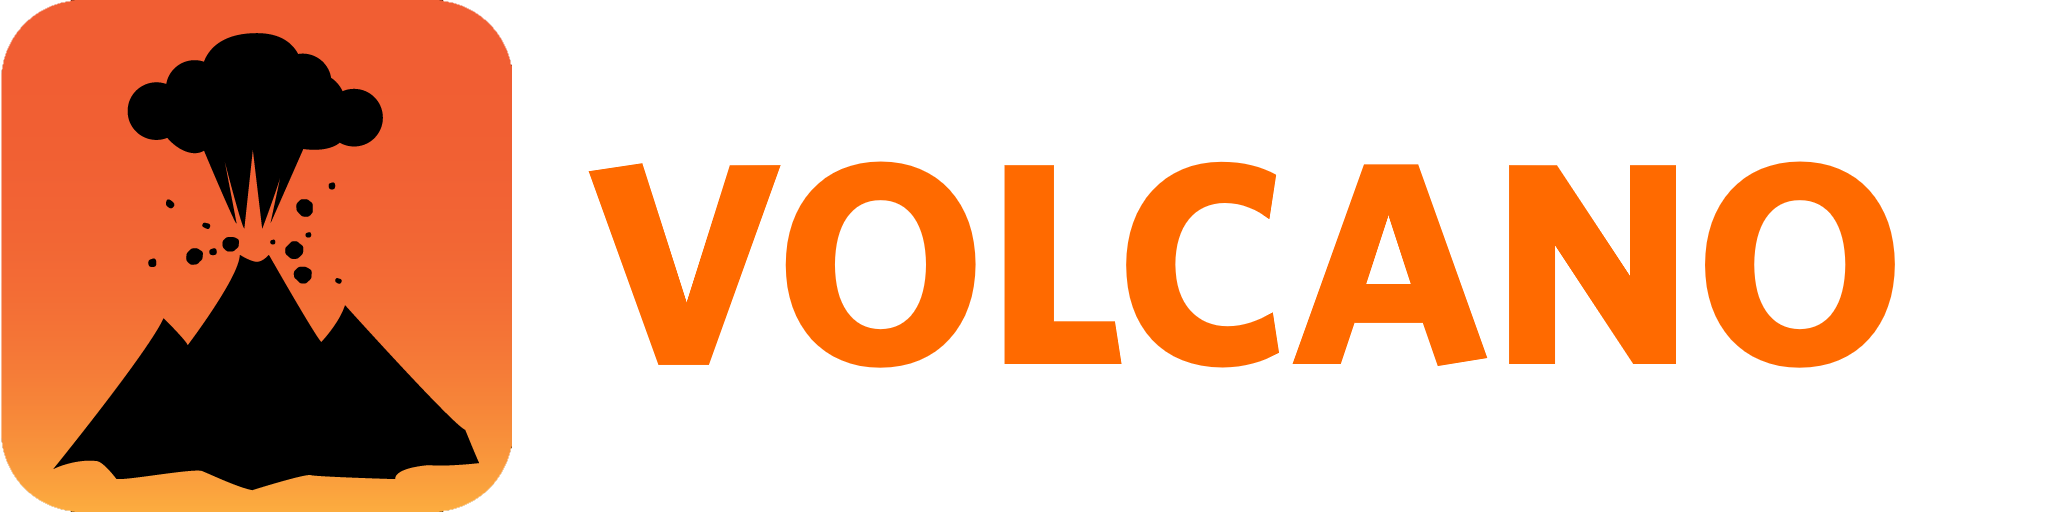 Volcano's icon, a cartoon style volcano eruption with the text "volcano".